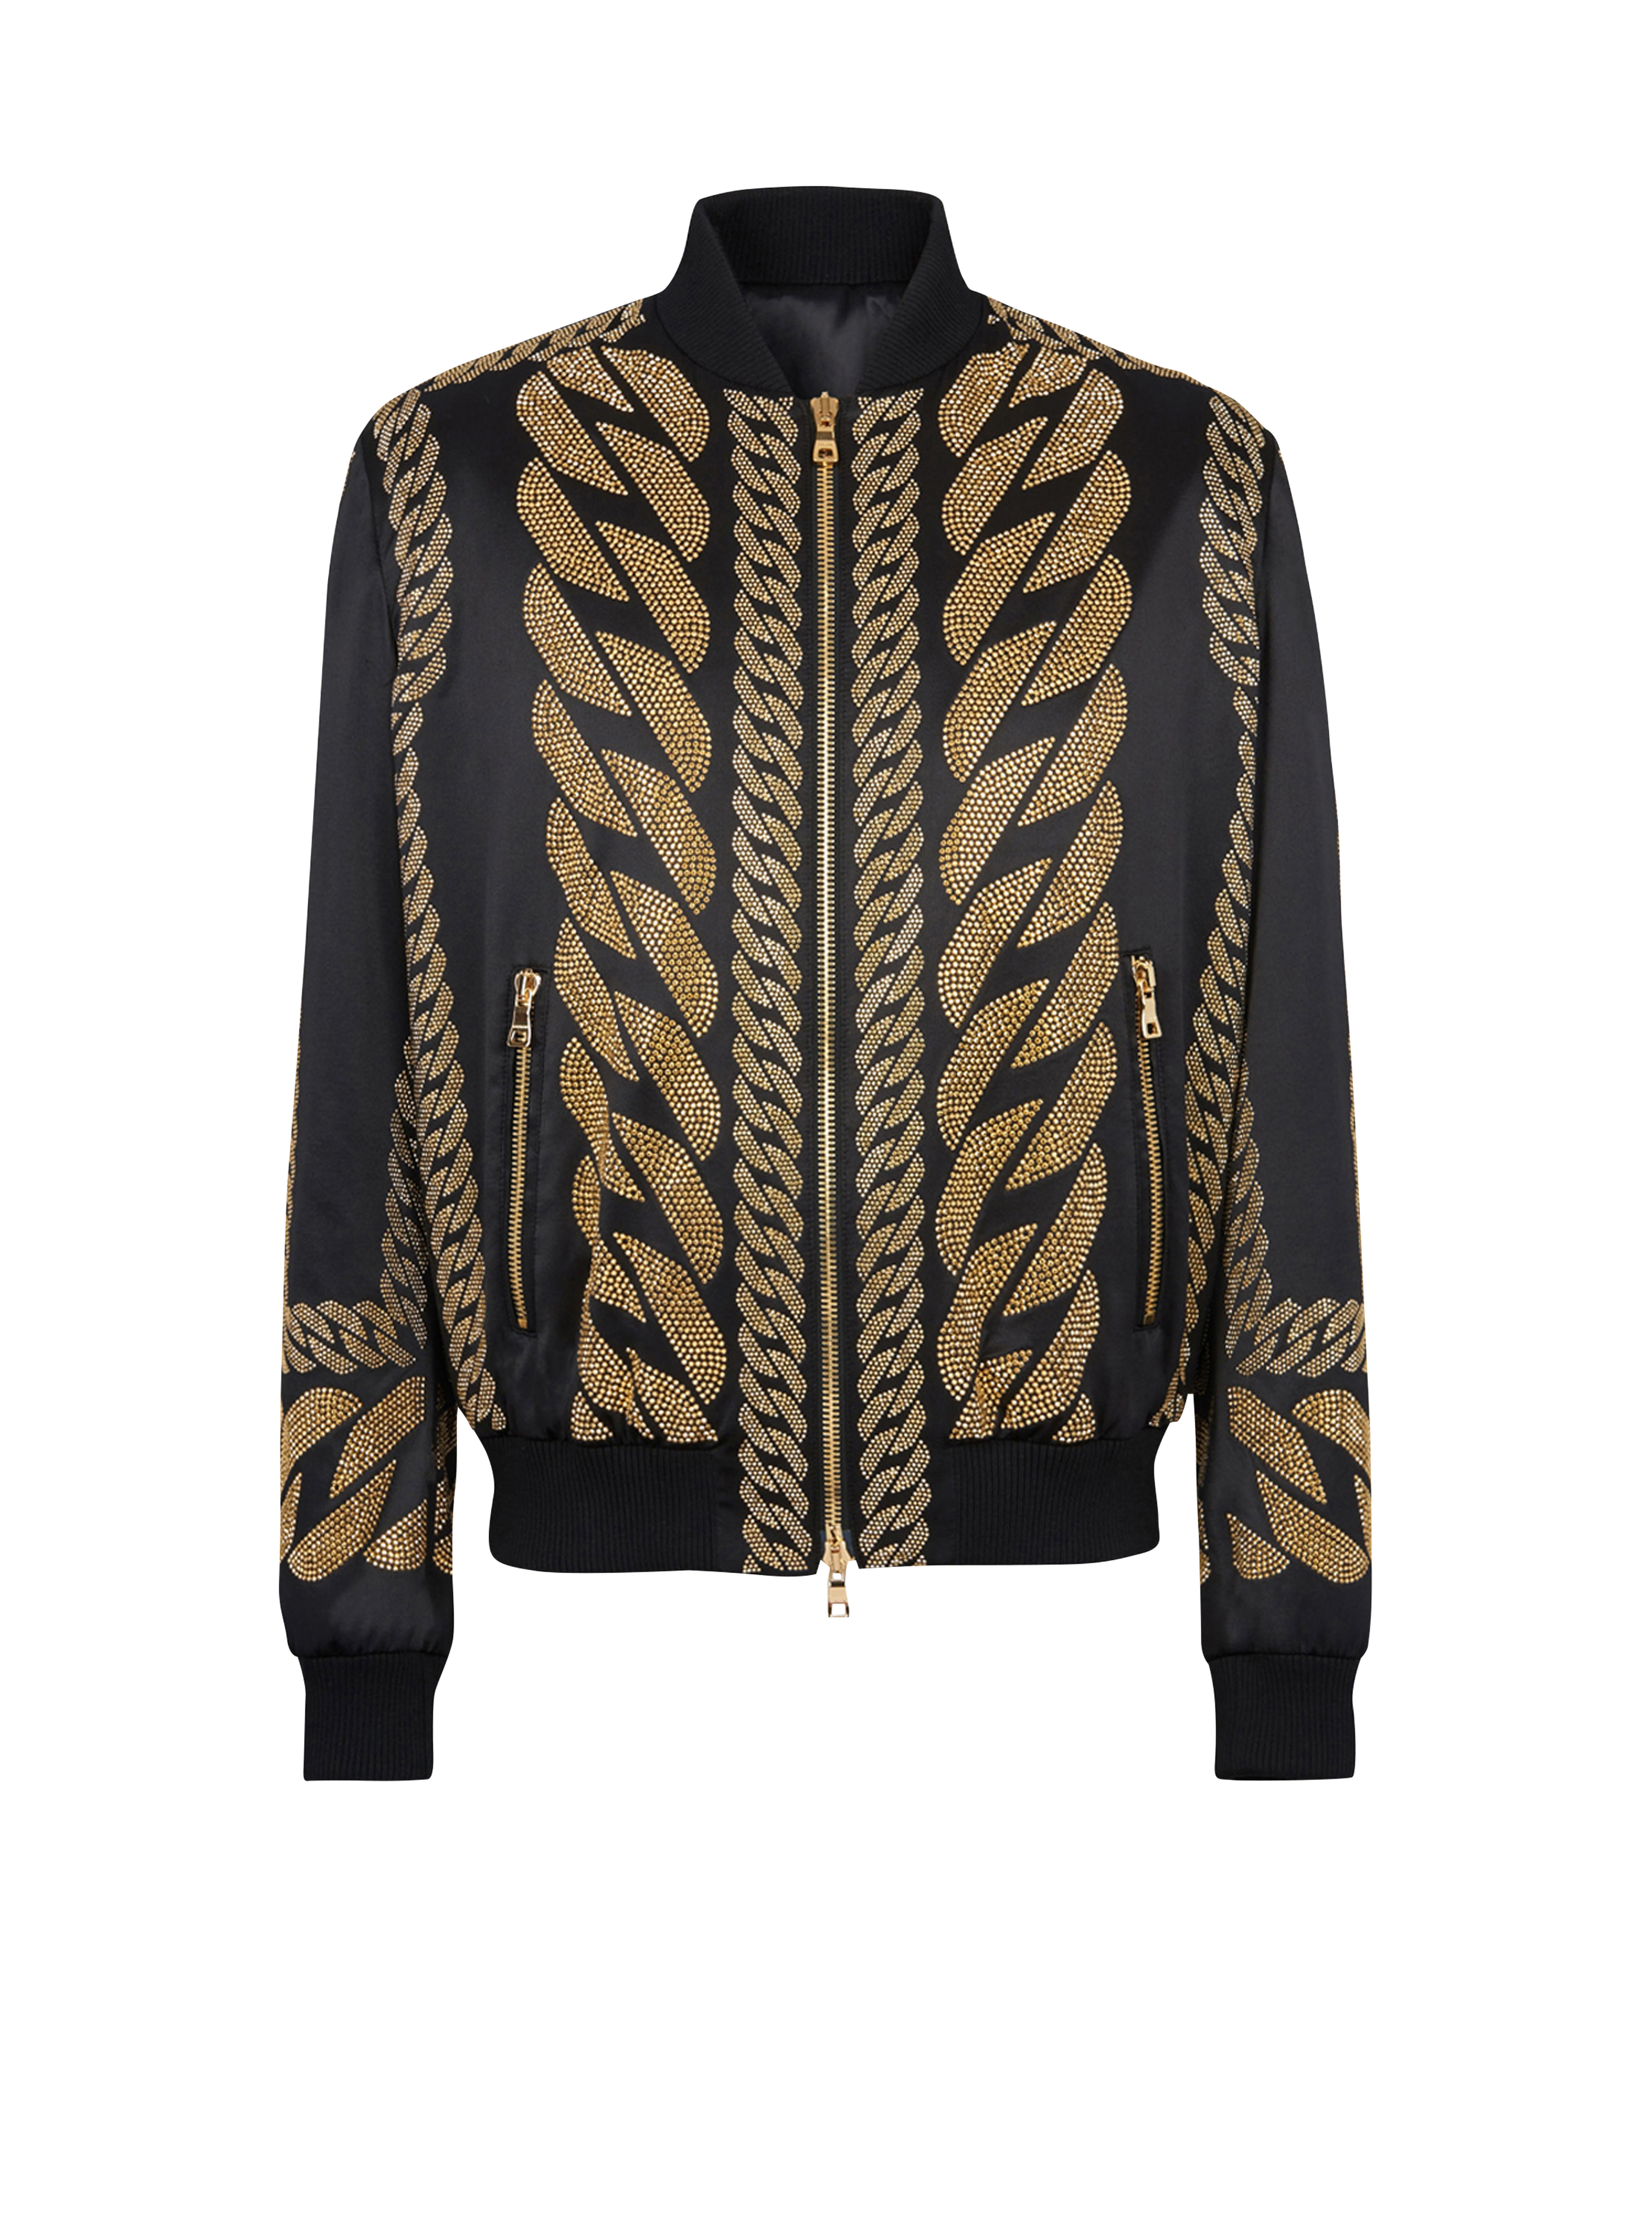 Silk bomber jacket with chain embroidery, black